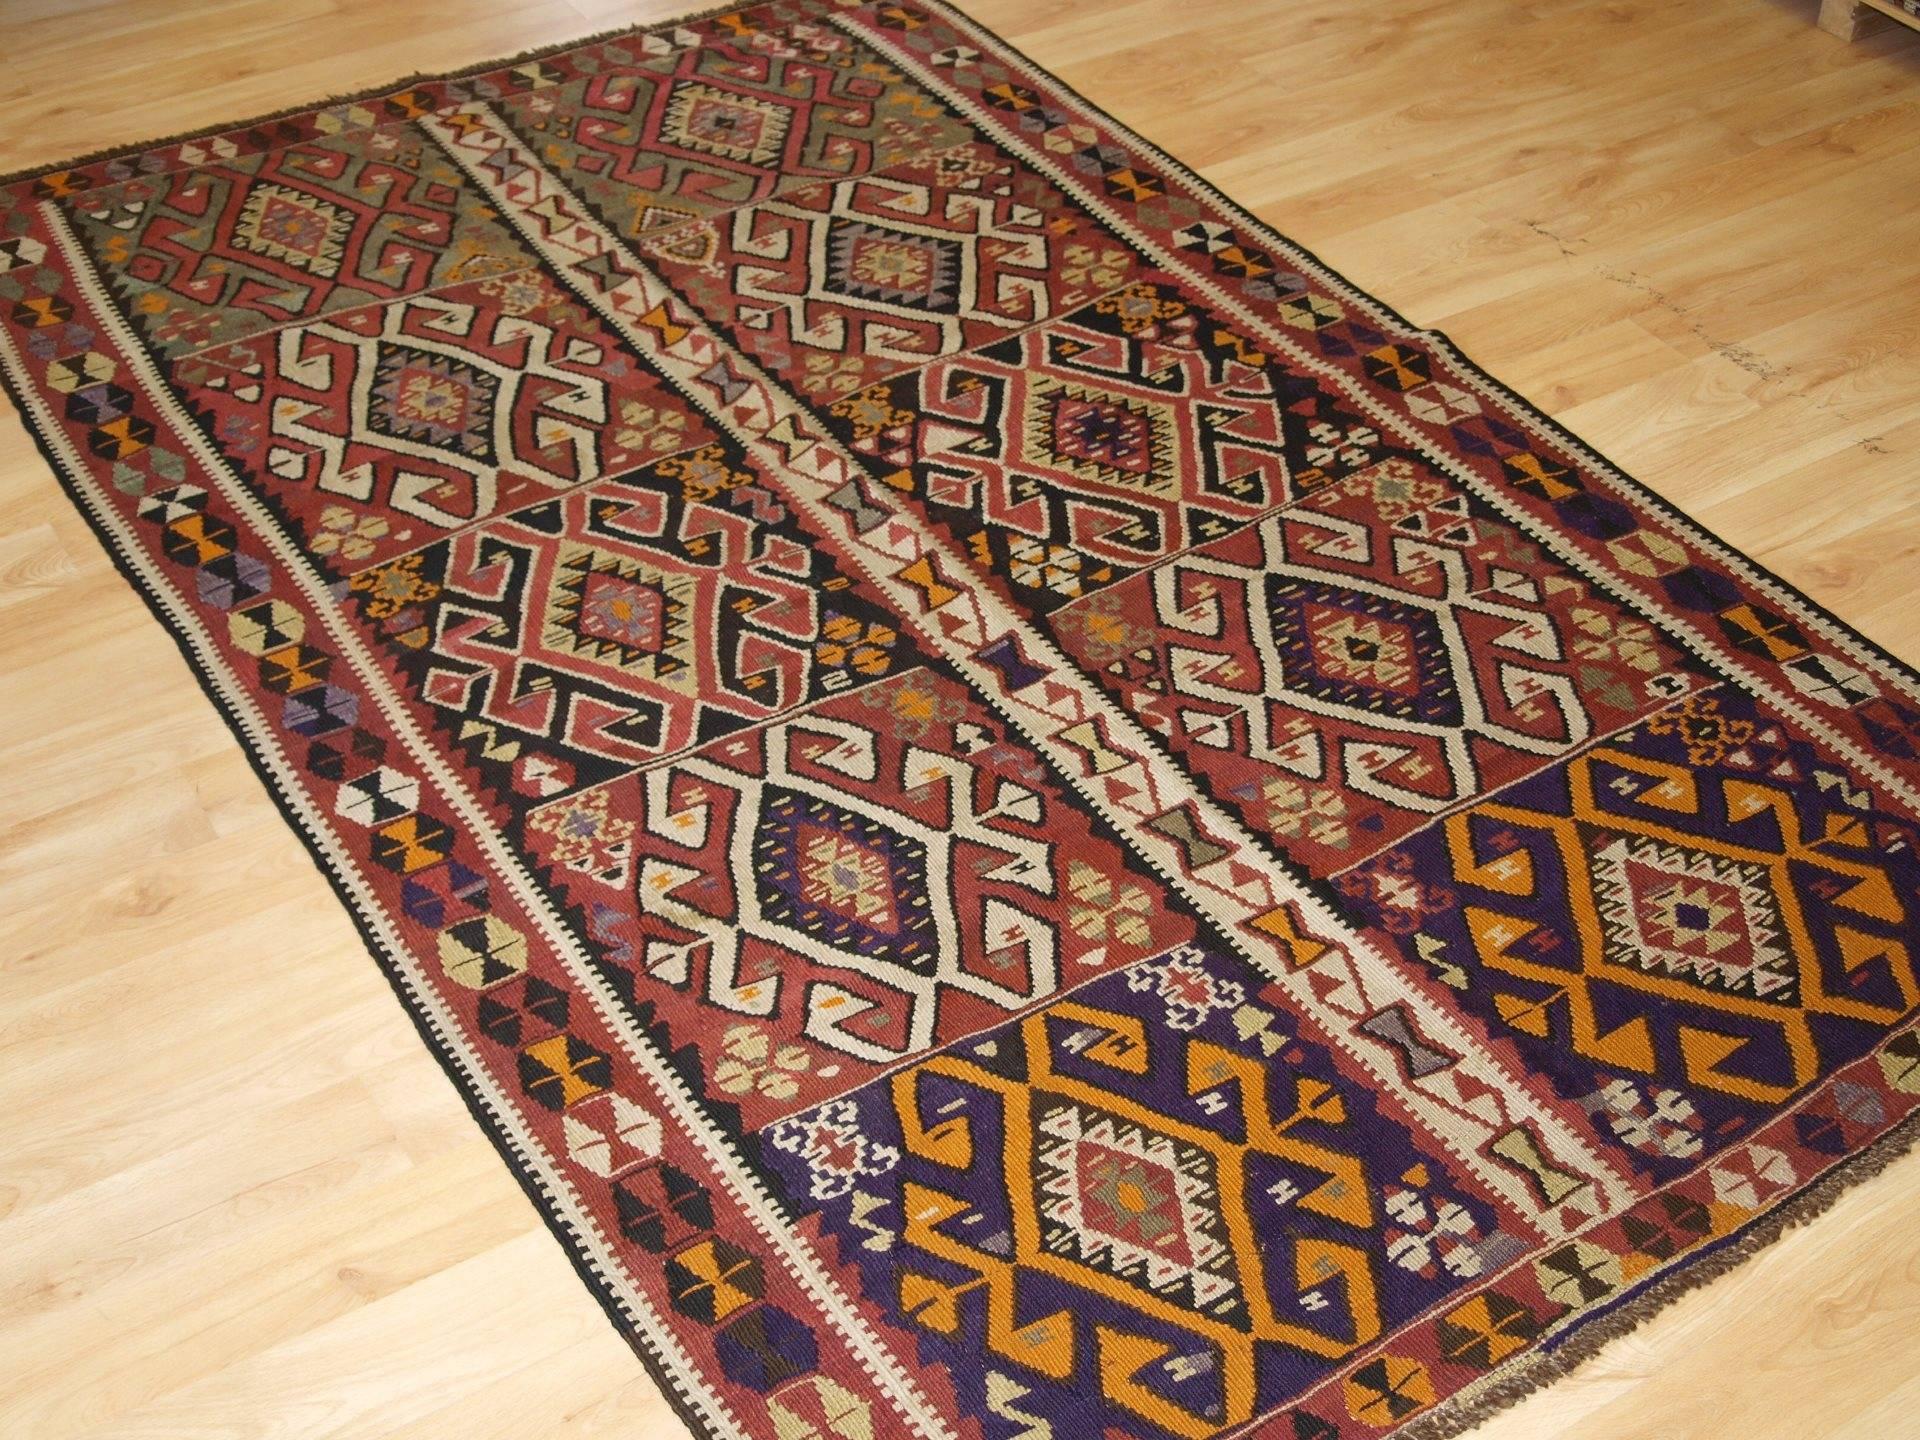 Old Turkish Kars Kilim with traditional village design, circa 1930
Size: 6ft 9in x 4ft 2in (205 x 127cm).

Old Turkish Kars Kilim, of traditional village design. The Kilim has a rustic feel with a bold graphic design. 

  

The Kilim has a